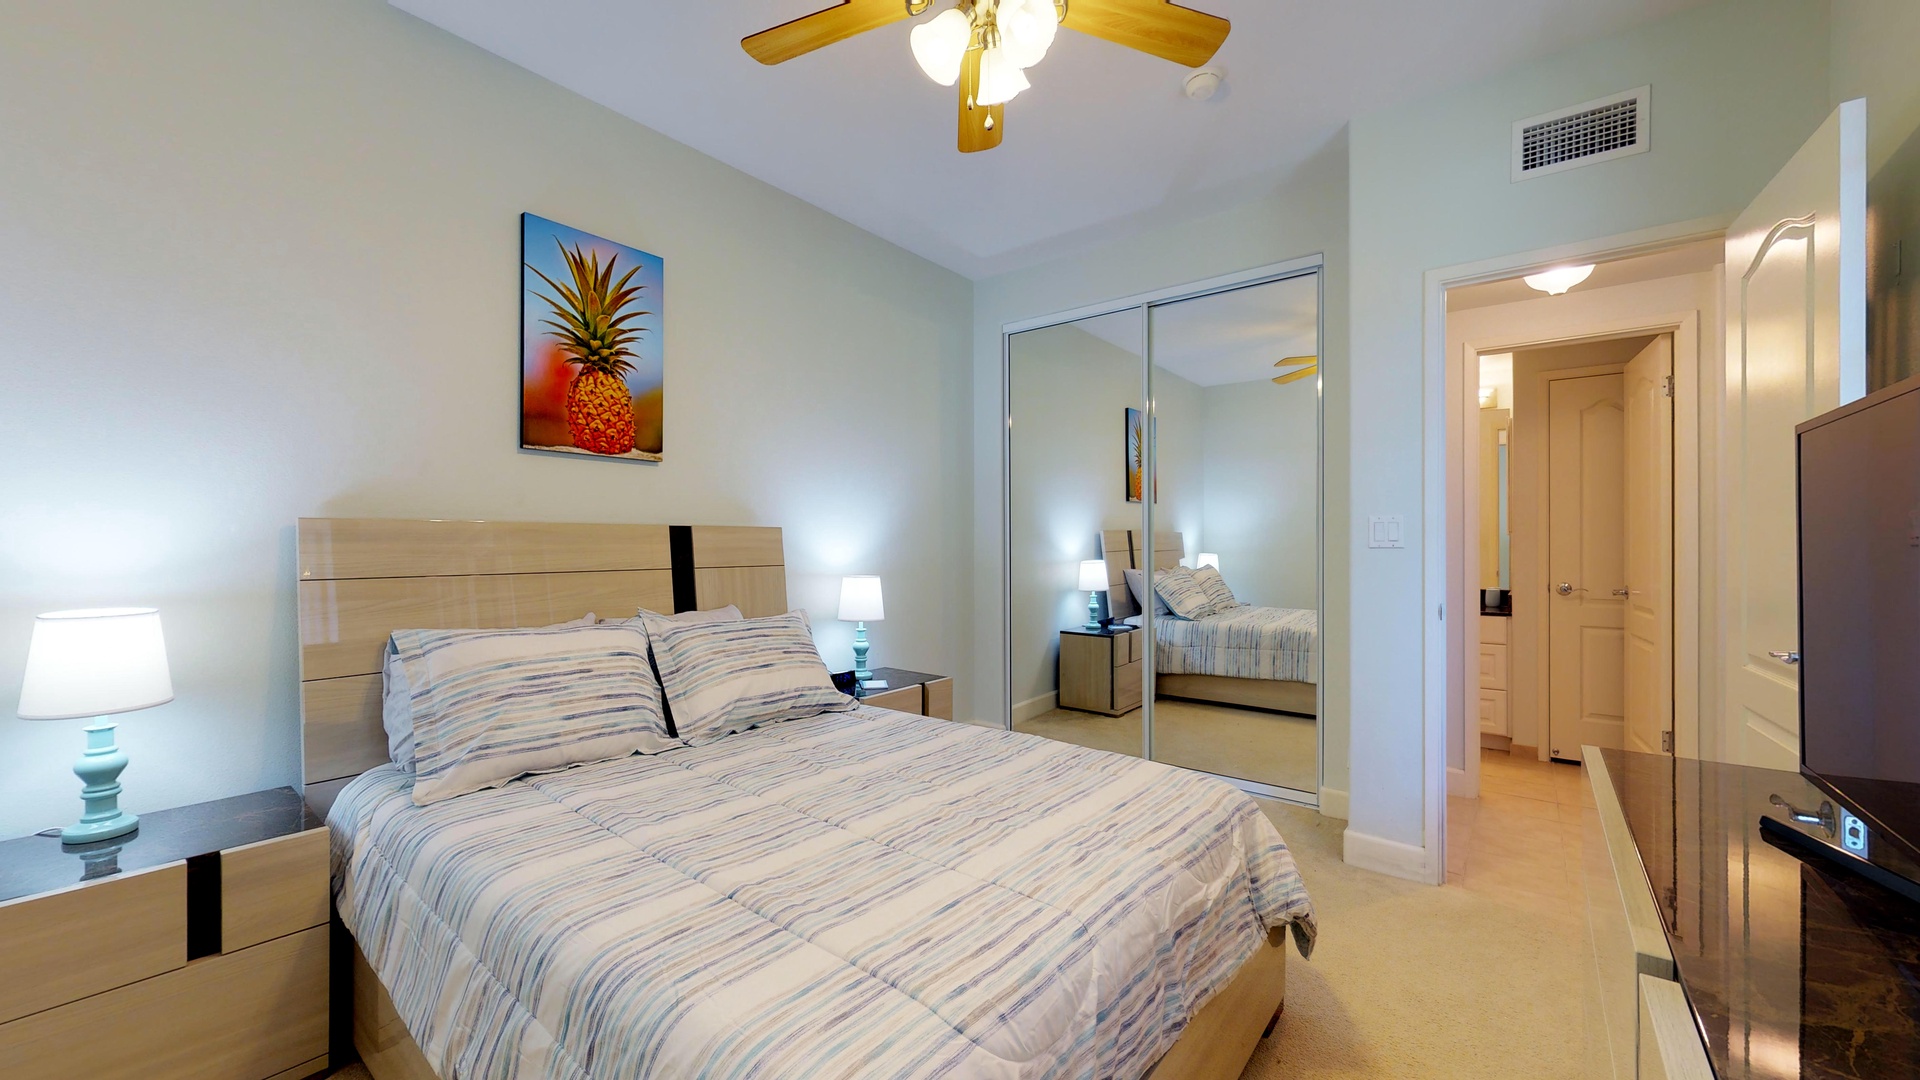 Kapolei Vacation Rentals, Ko Olina Kai 1035D - The downstairs guest bedroom with a queen bed and TV.